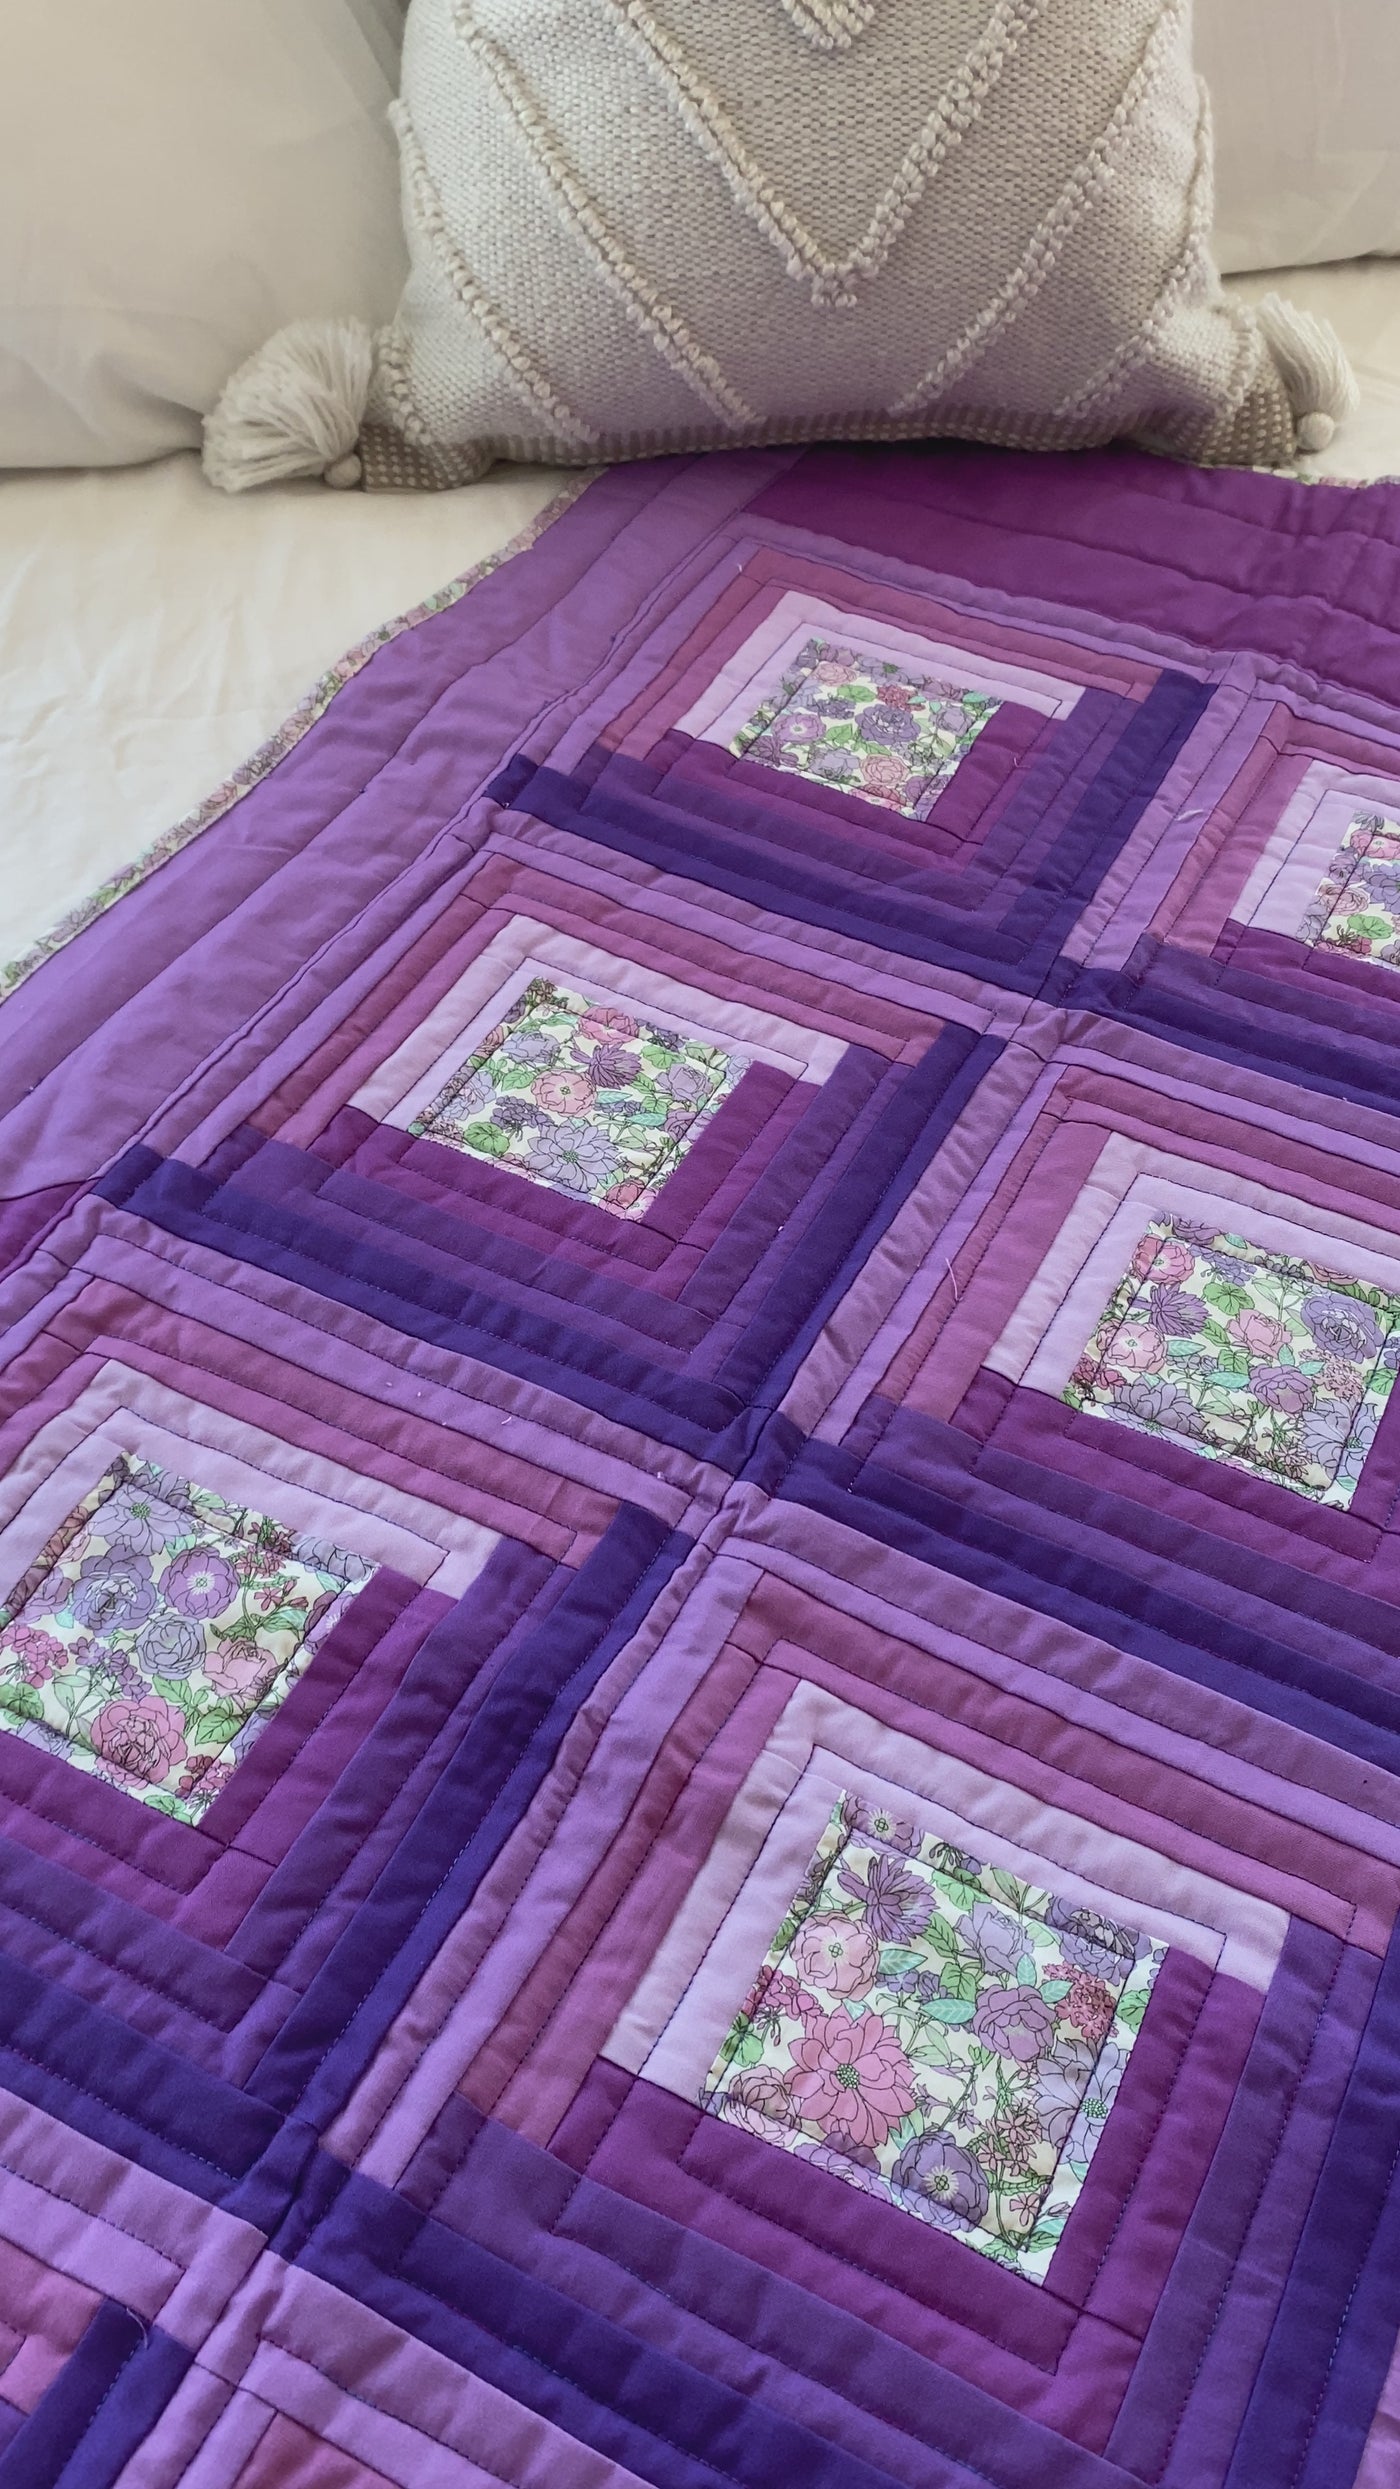 A video of the details of this "Cabin in the Garden- purple" lap quilt.. This heirloom lap quilt with a log cabin pattern with shades of lavenders and purples and a small print floral cover the front of this quilt. The binding and backing match the center floral print. It is made with a warm, heavy weight cotton/wool blend batting inside.